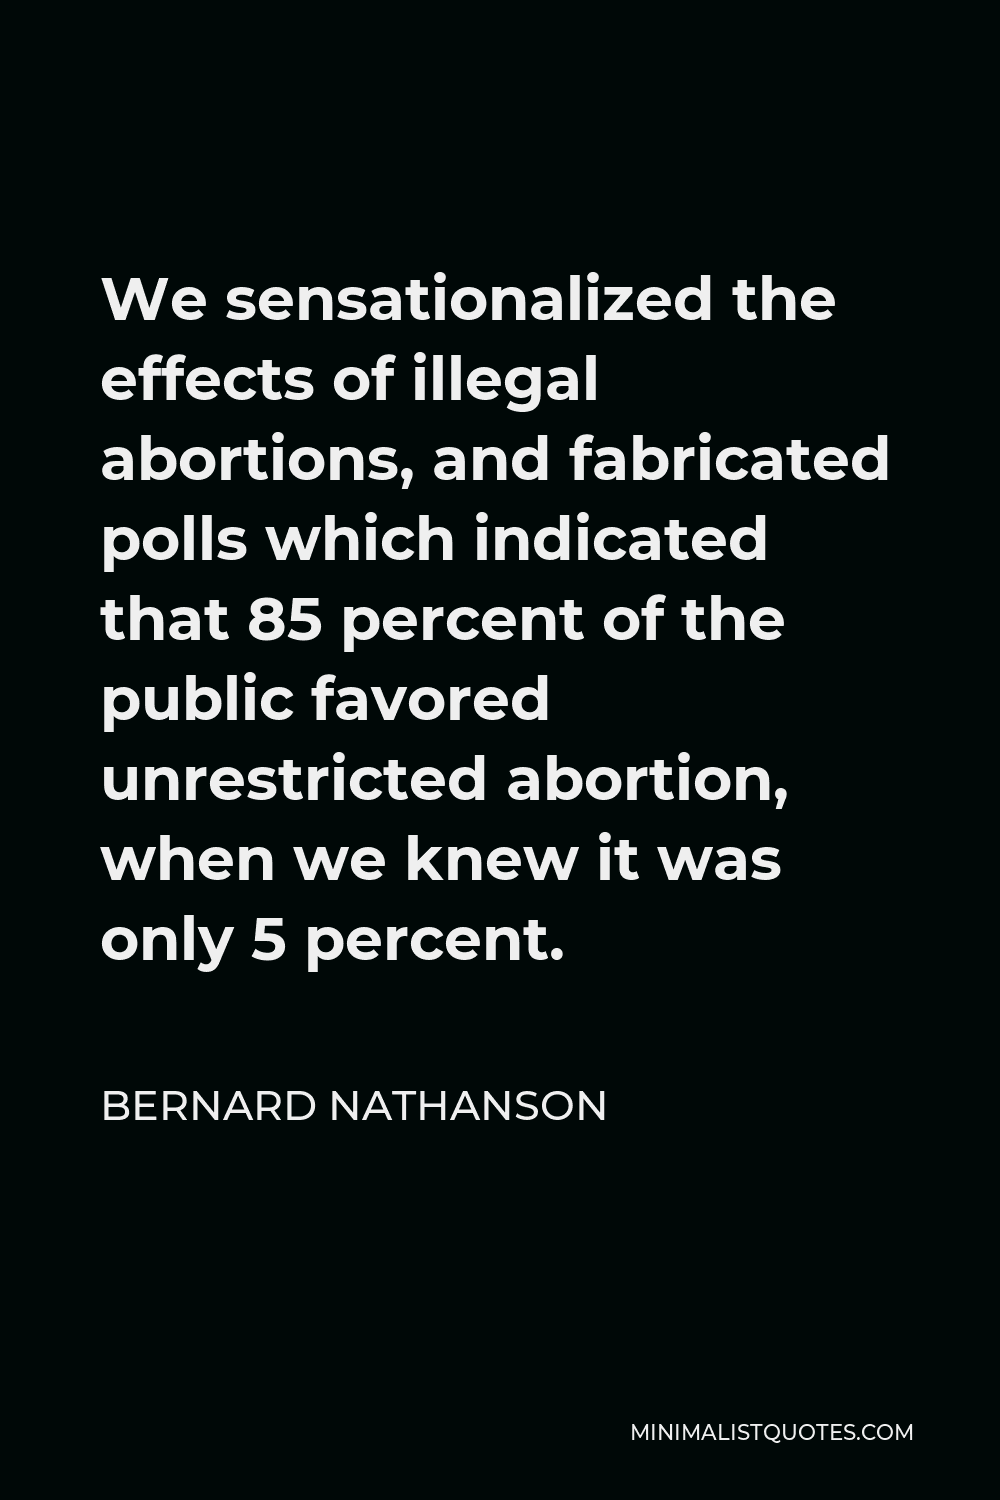 Bernard Nathanson Quote - We sensationalized the effects of illegal abortions, and fabricated polls which indicated that 85 percent of the public favored unrestricted abortion, when we knew it was only 5 percent.